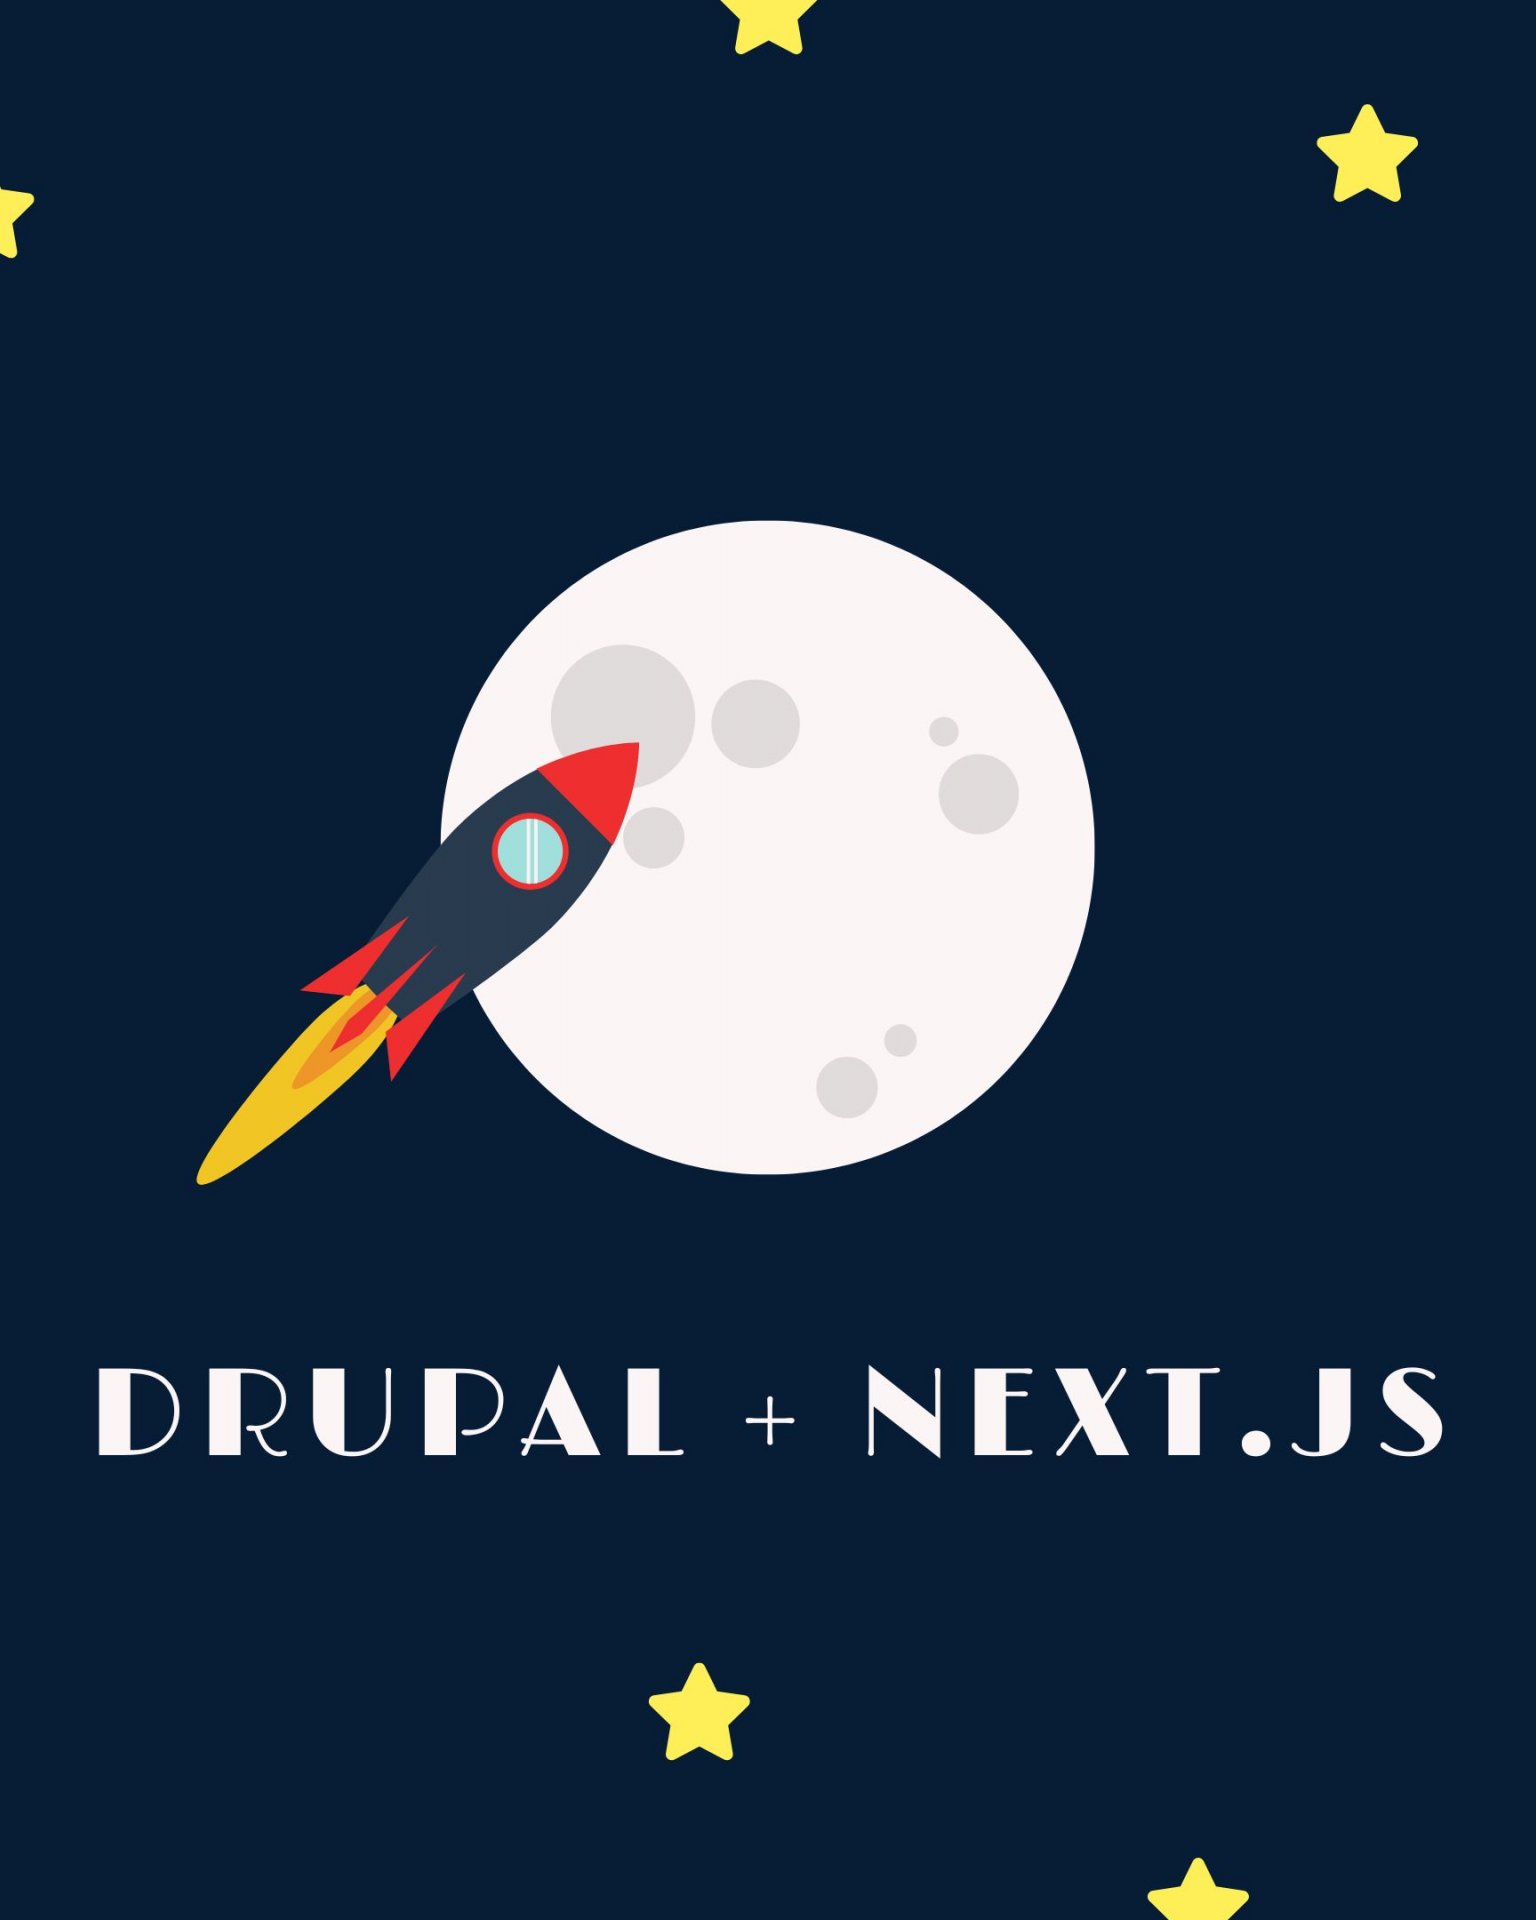 Drupal + Next.js to the moon